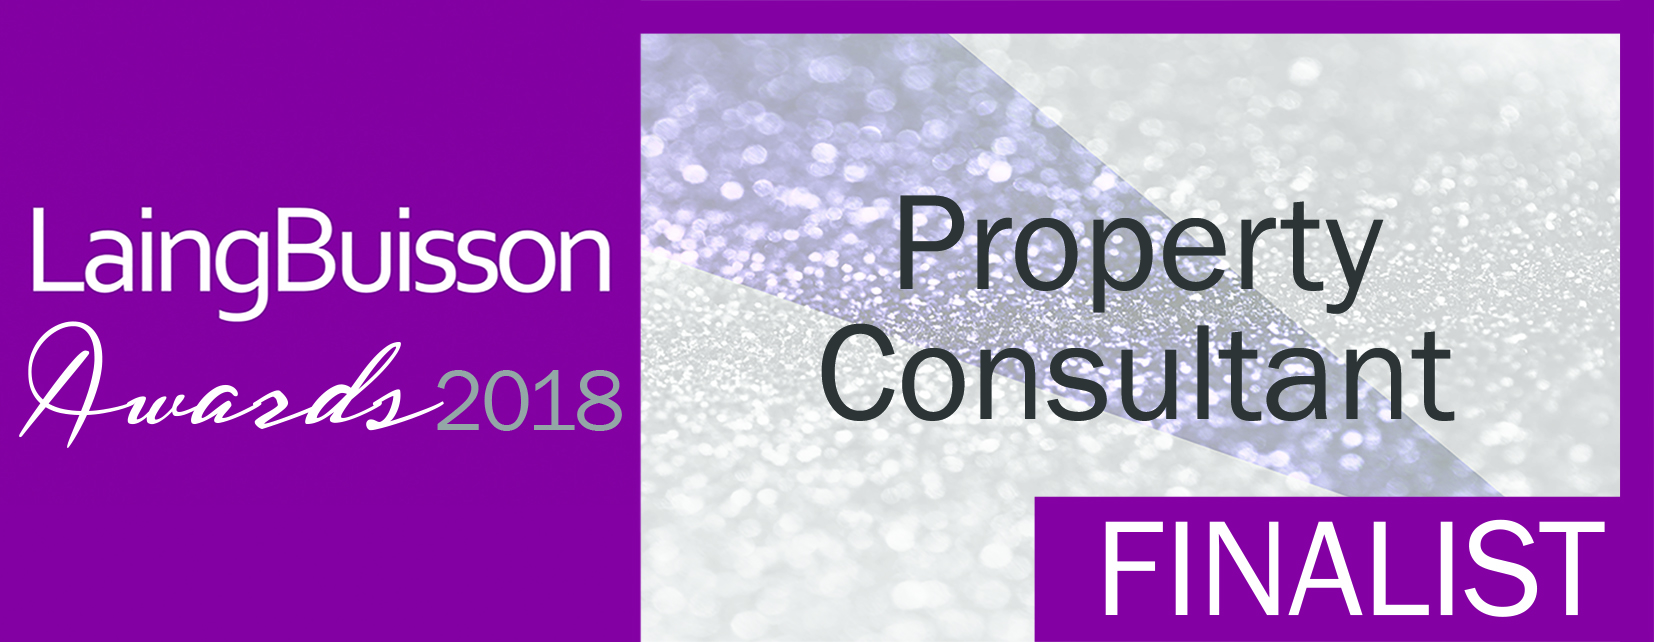 Carterwood named as LaingBuisson’s ‘Property Consultant of the Year’ finalist